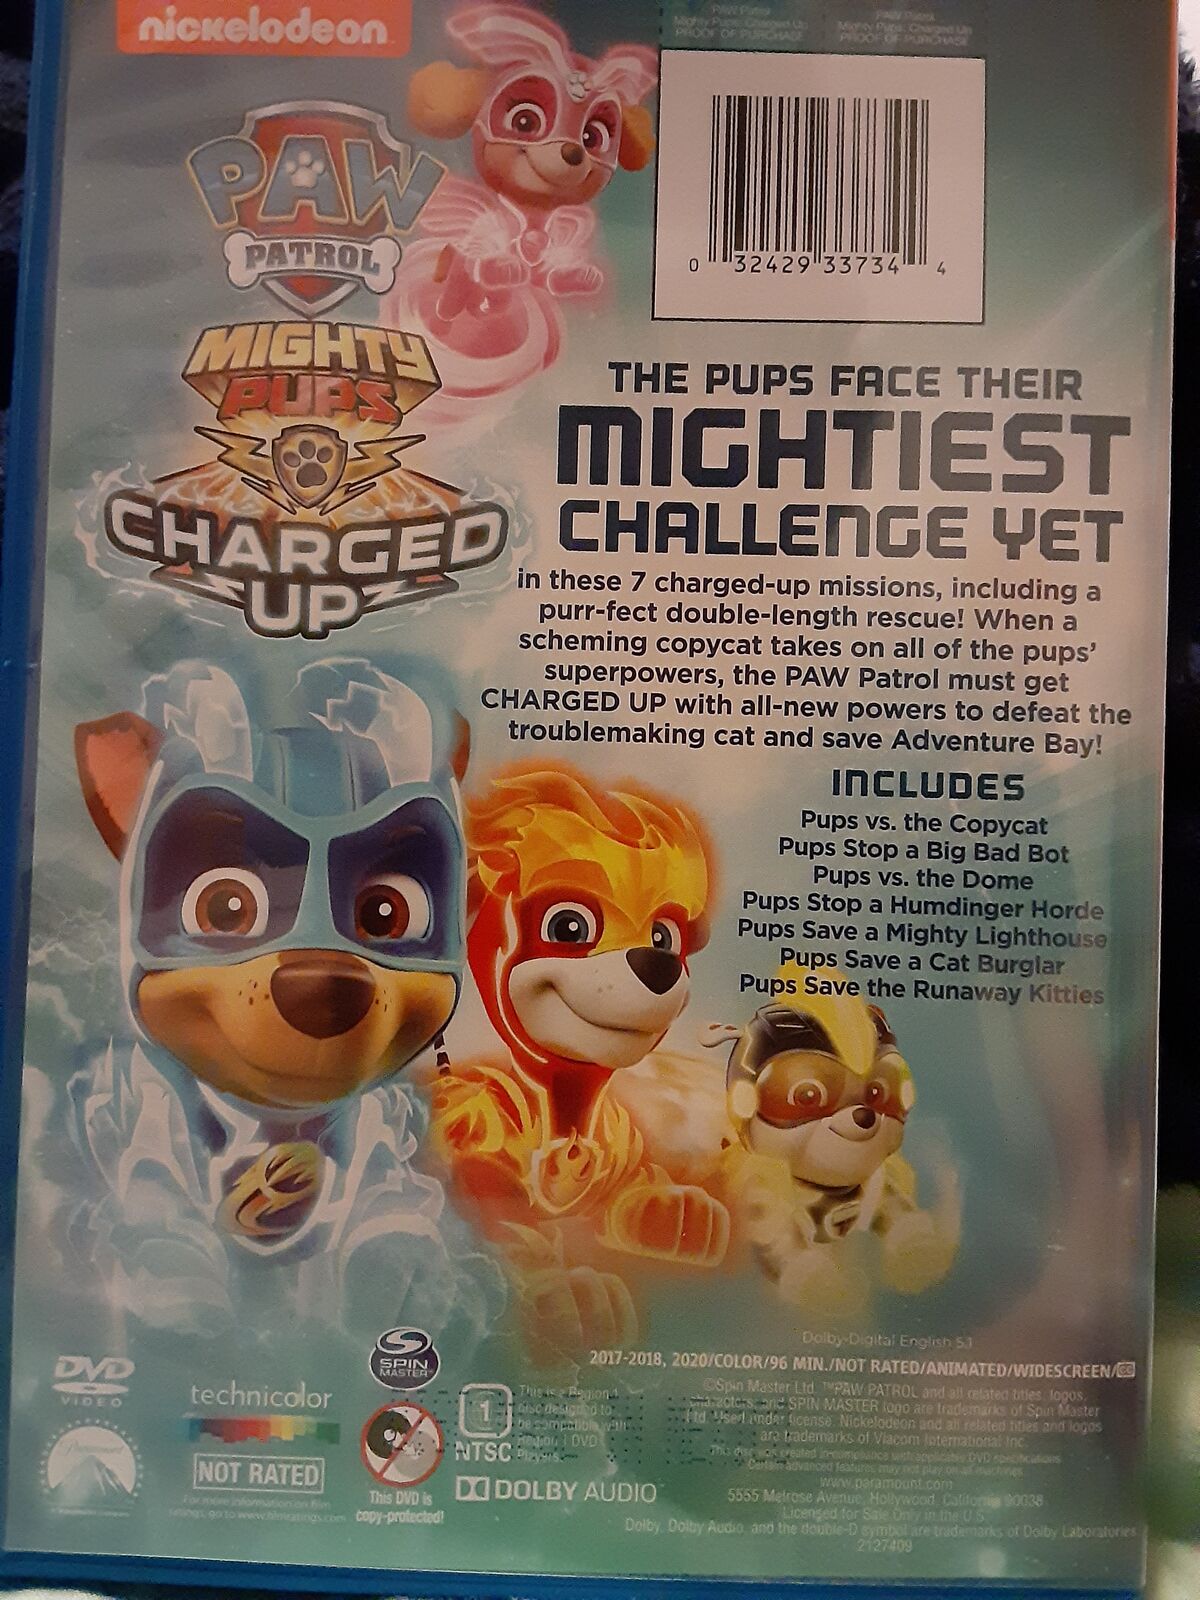 Burma bevægelse overdraw Mighty Pups, Charged Up (DVD) | PAW Patrol Wiki | Fandom